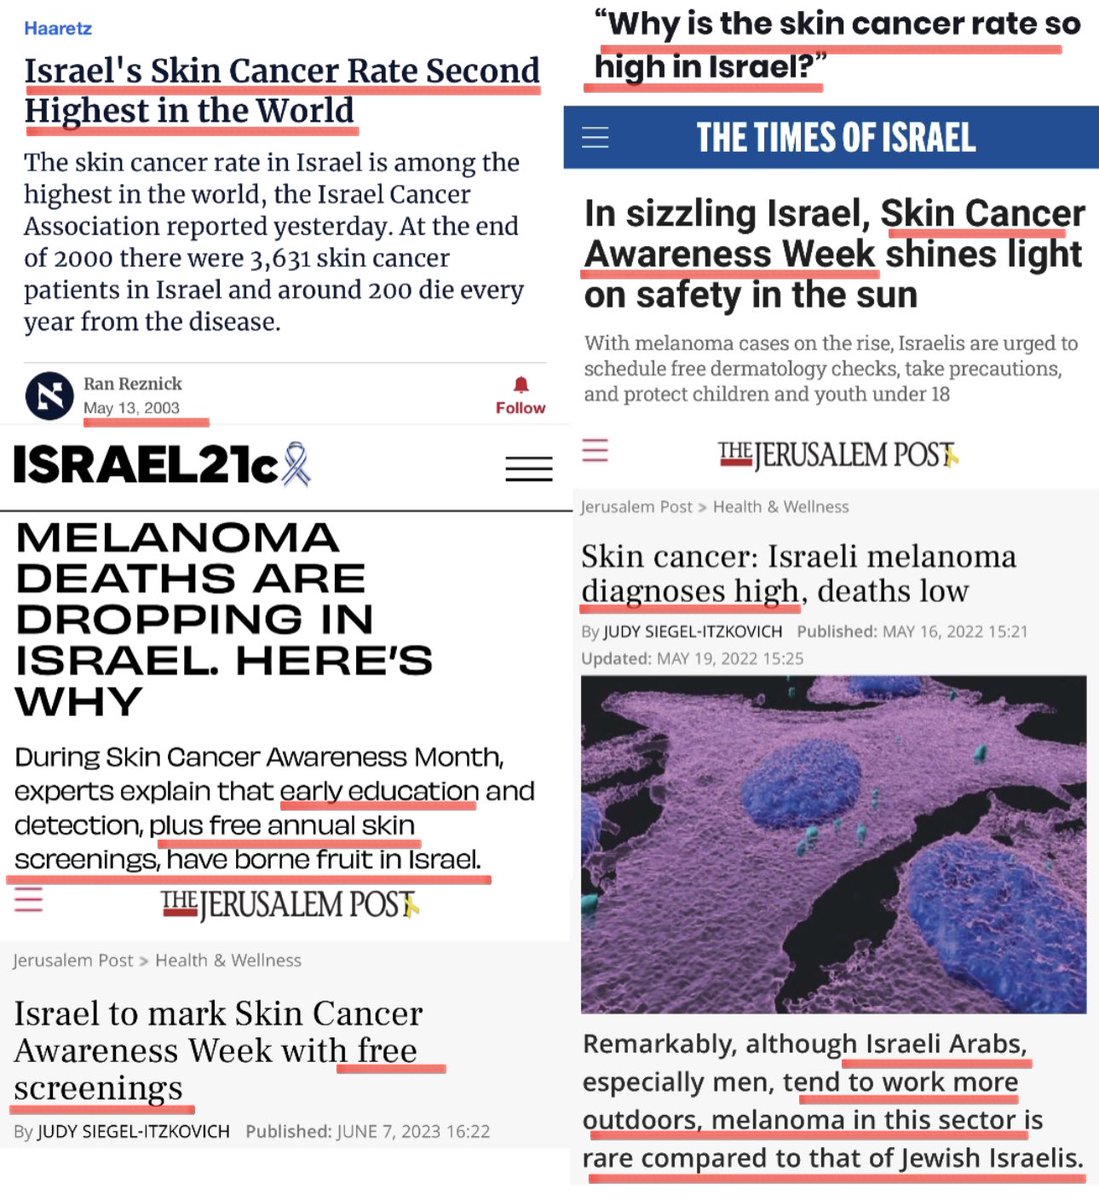 🇮🇱🧬 Israel Once Had the Second Highest Skin Cancer Rate in the World

In 2003, Israel was ranked 2nd in the world for having the highest skin cancer rate per capita.

Now they sit at 23rd in the world.

What did they do to fall so dramatically in the rankings?

1. The Israel